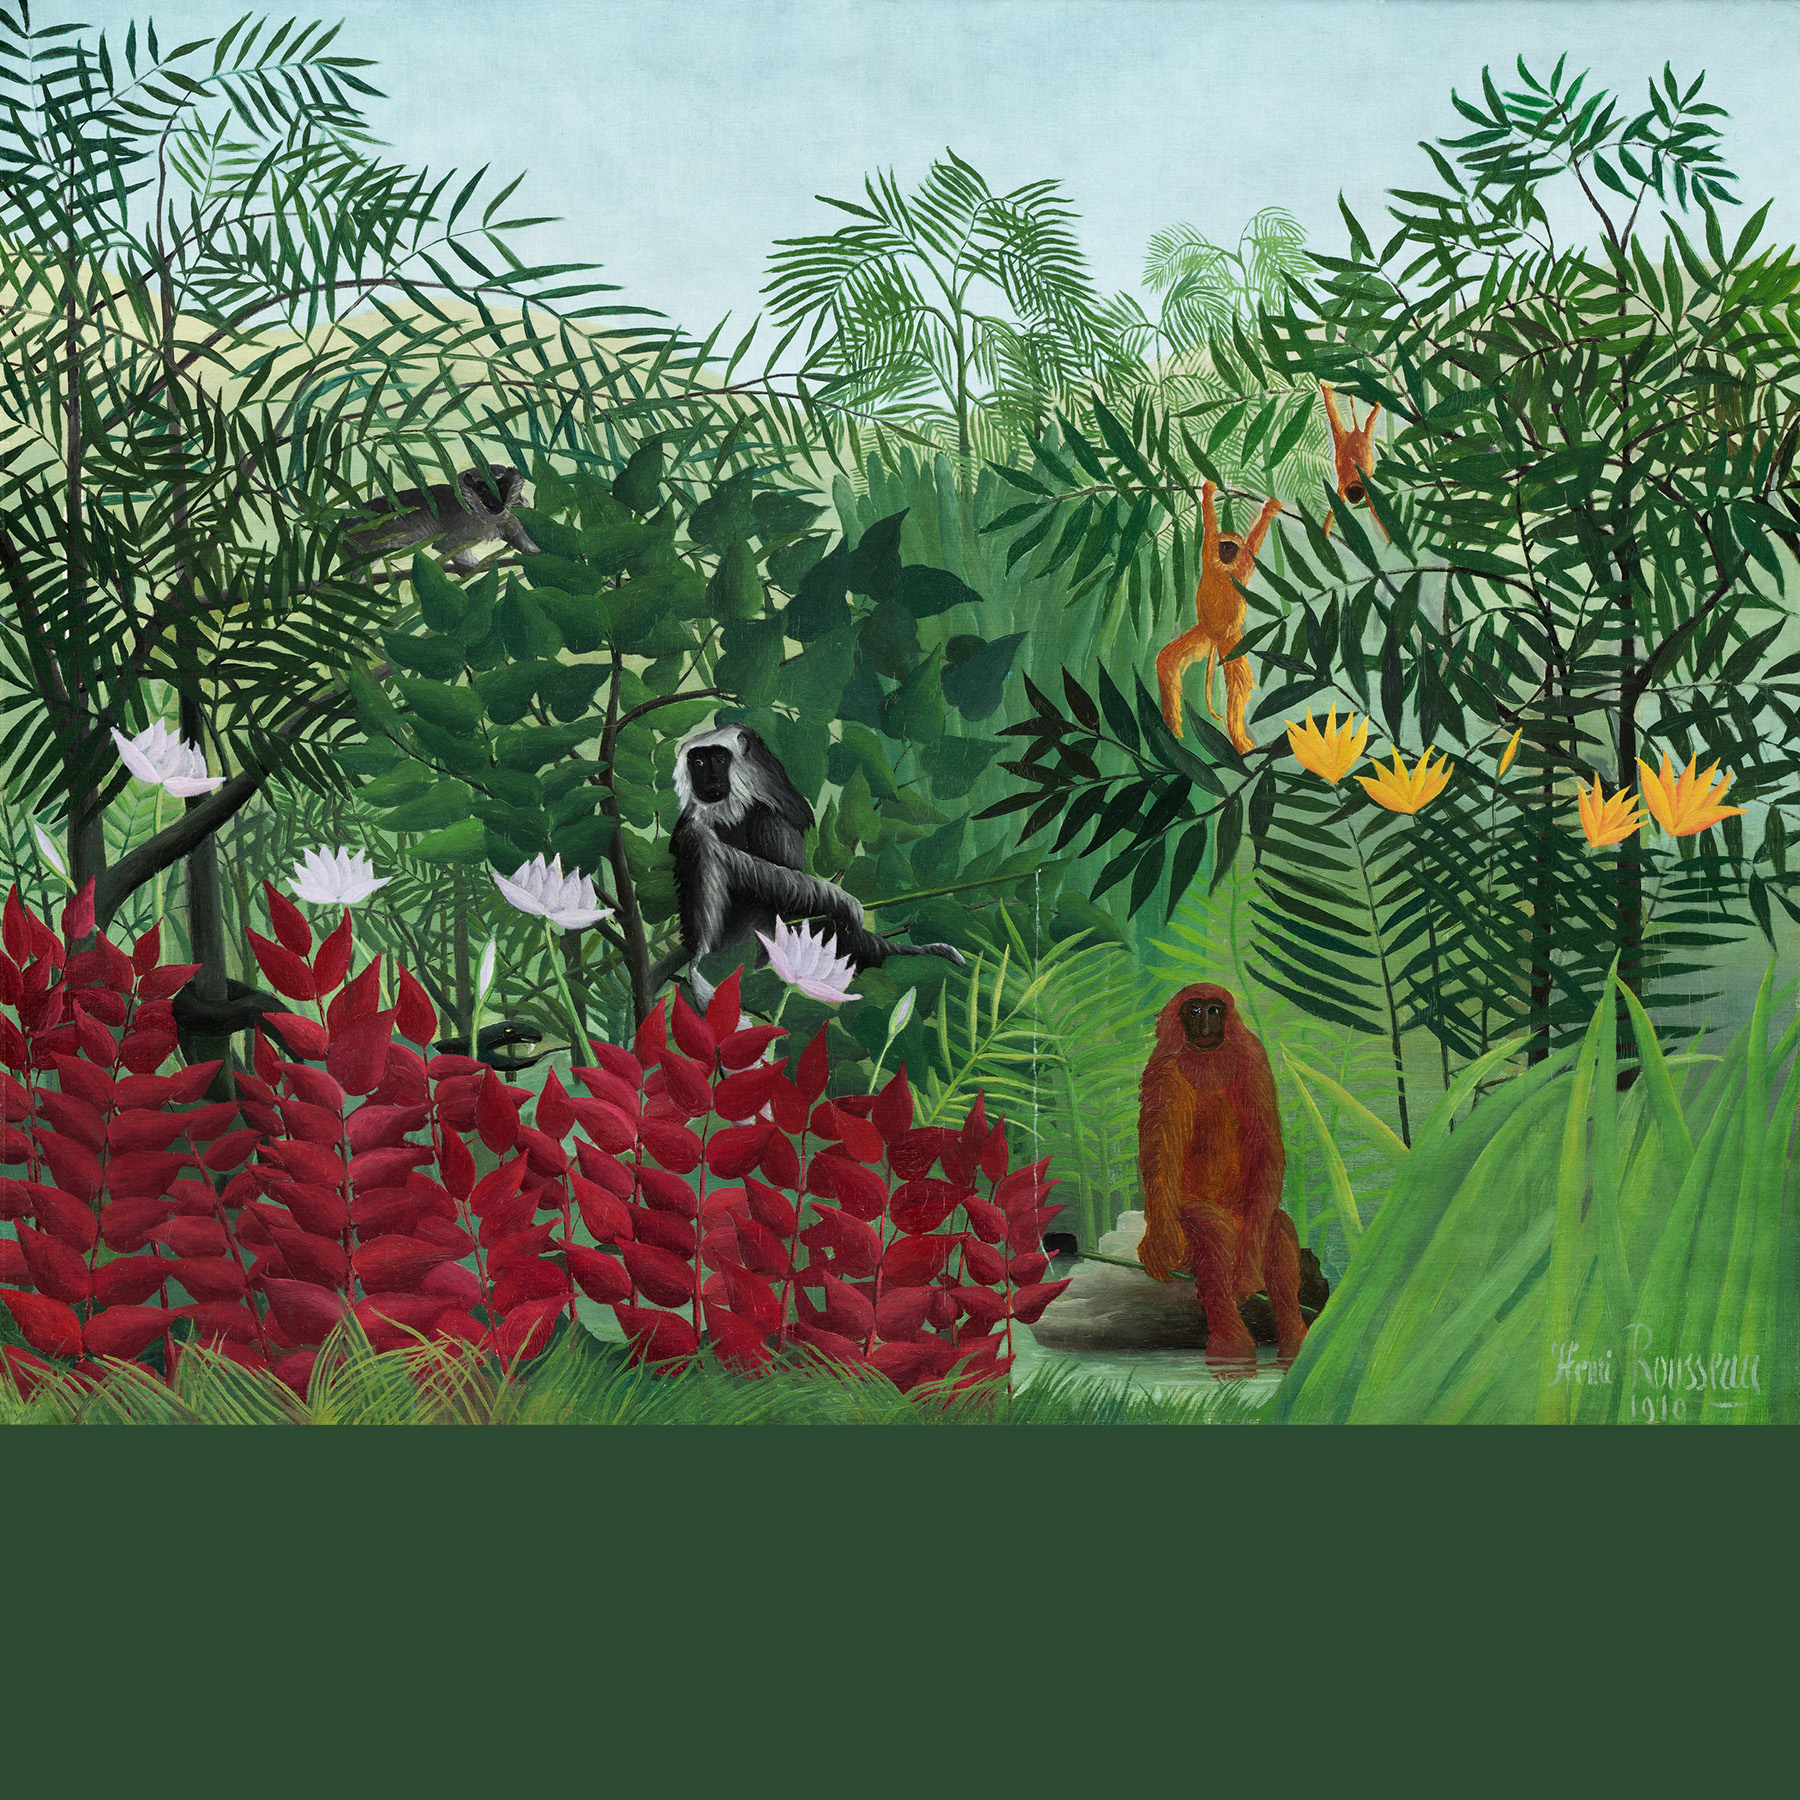 Tropical Forest with Monkeys (1910) by H. Rousseau